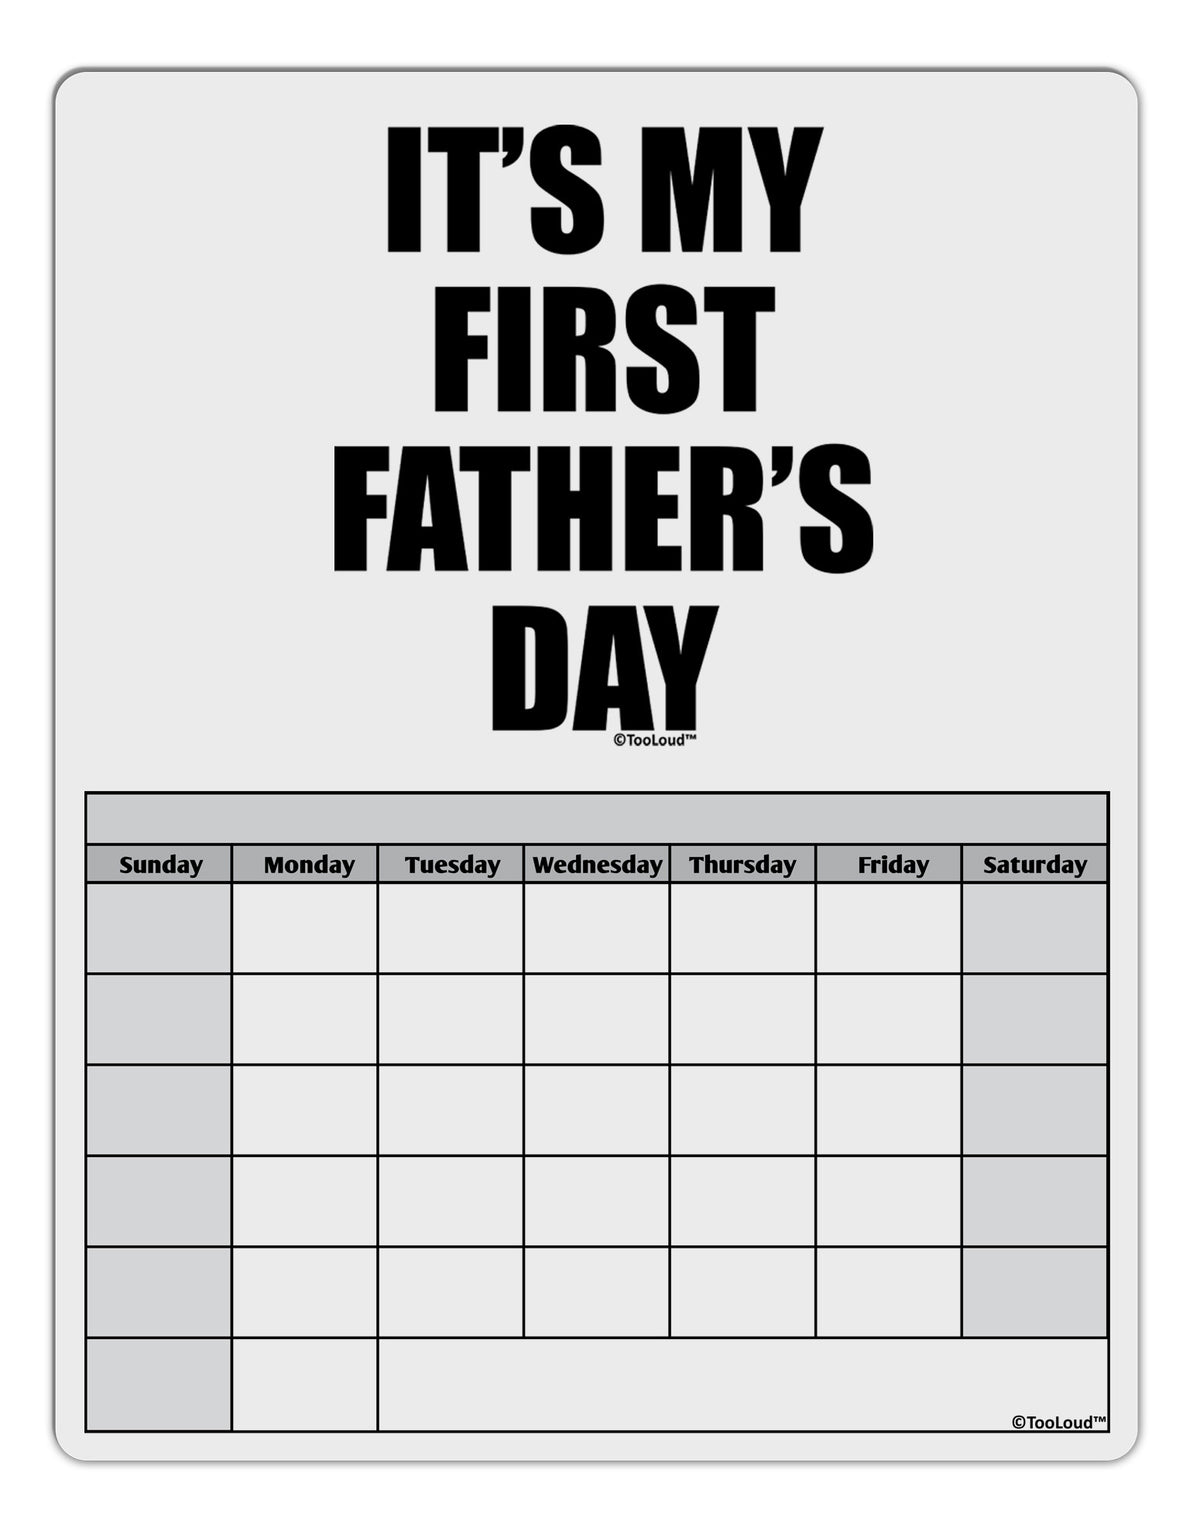 it-s-my-first-father-s-day-blank-calendar-dry-erase-board-davson-sales